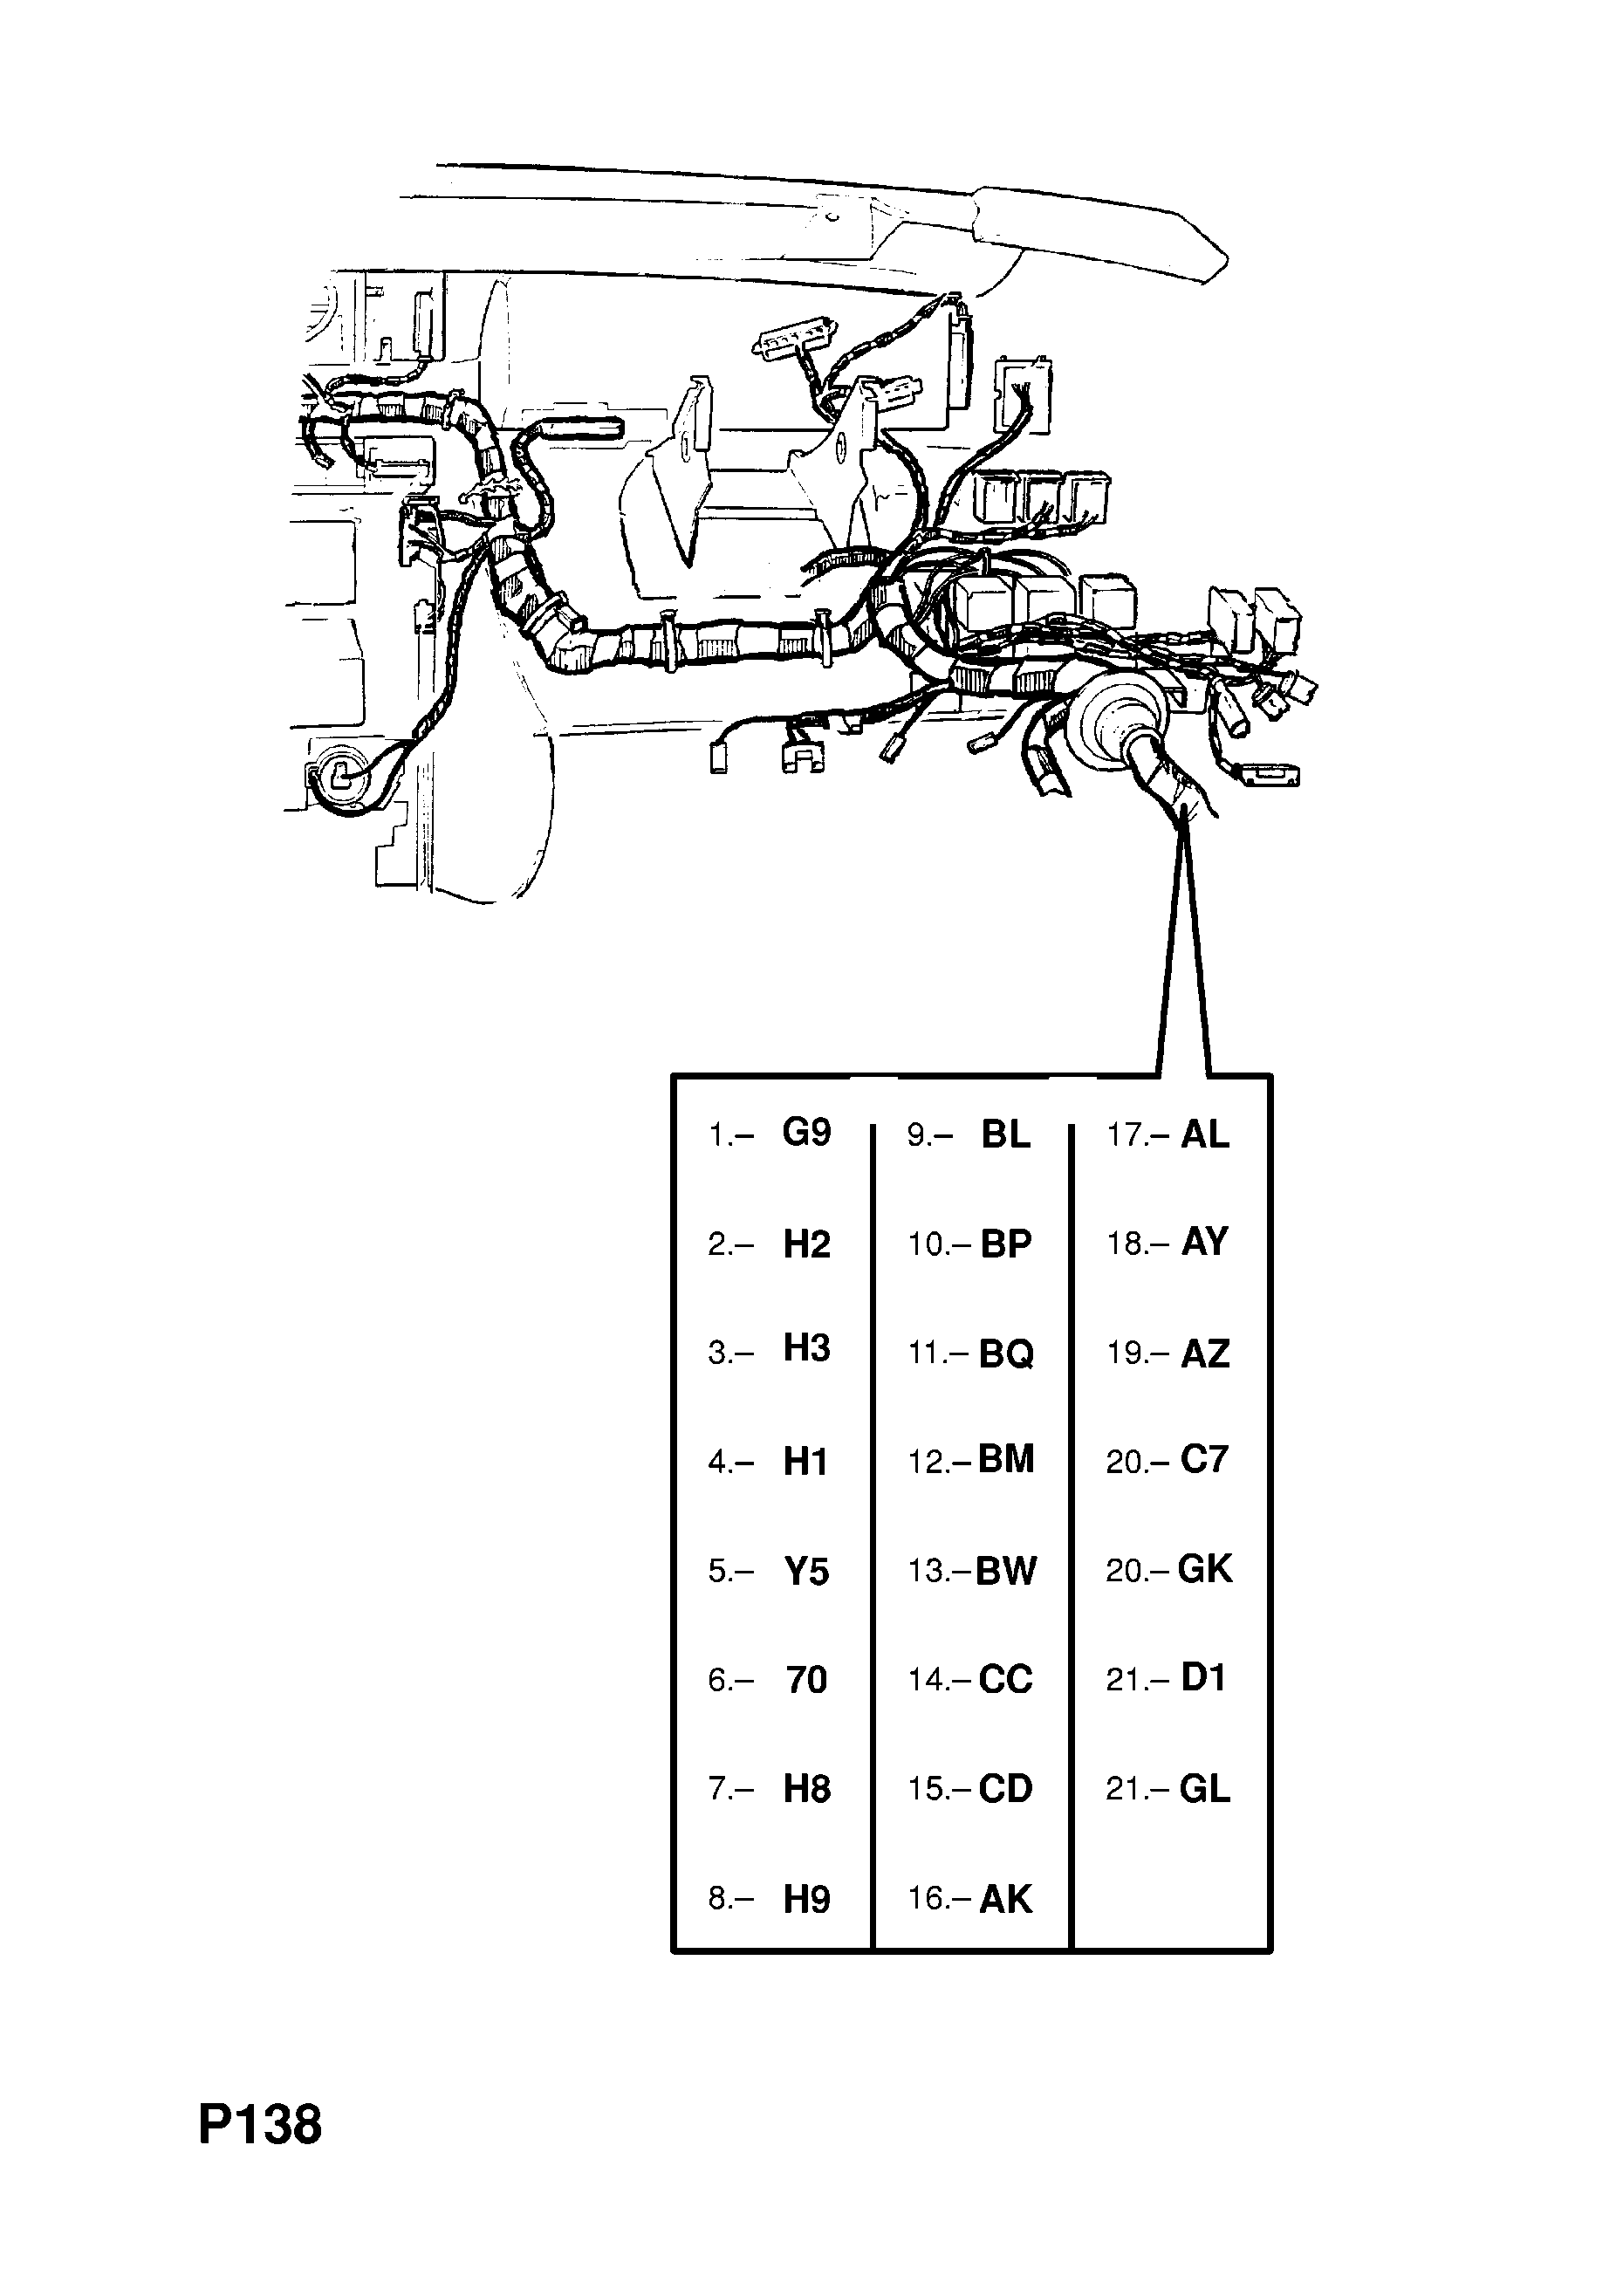 INSTRUMENT PANEL WIRING HARNESS (CONTD.) <small><i>[H1000001-L1999999 FOR AUTOMATIC TRANSMISSION EXCEPT AIR CONDITIONING AND LCD INSTRUMENTS (CONTD.)]</i></small>